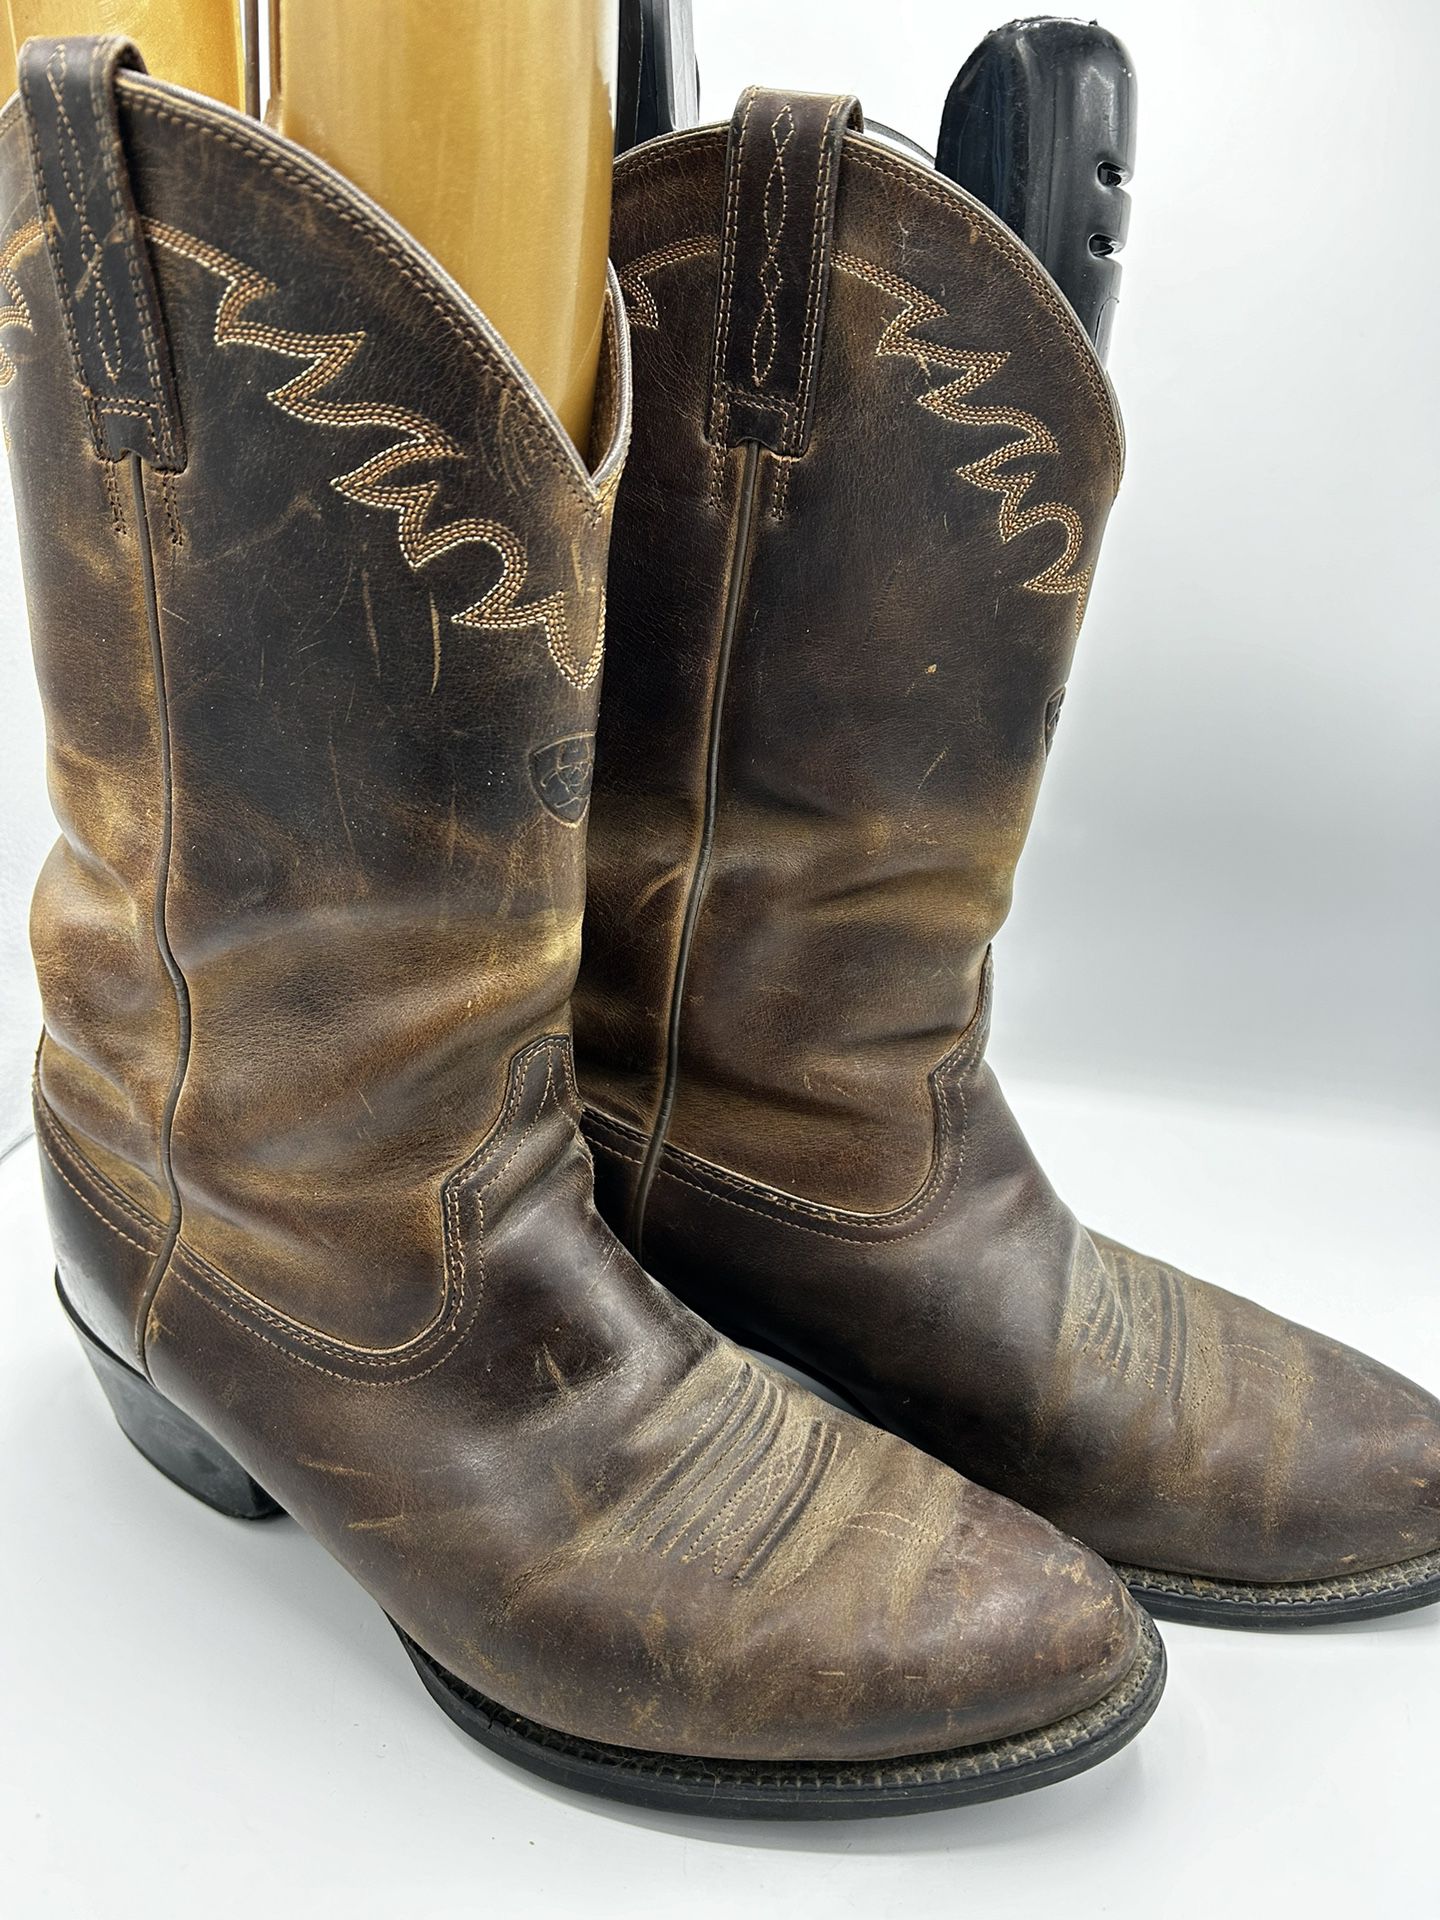 Ariat Sedona Brown 34625 Leather Embroidered Western Cowboy Boots